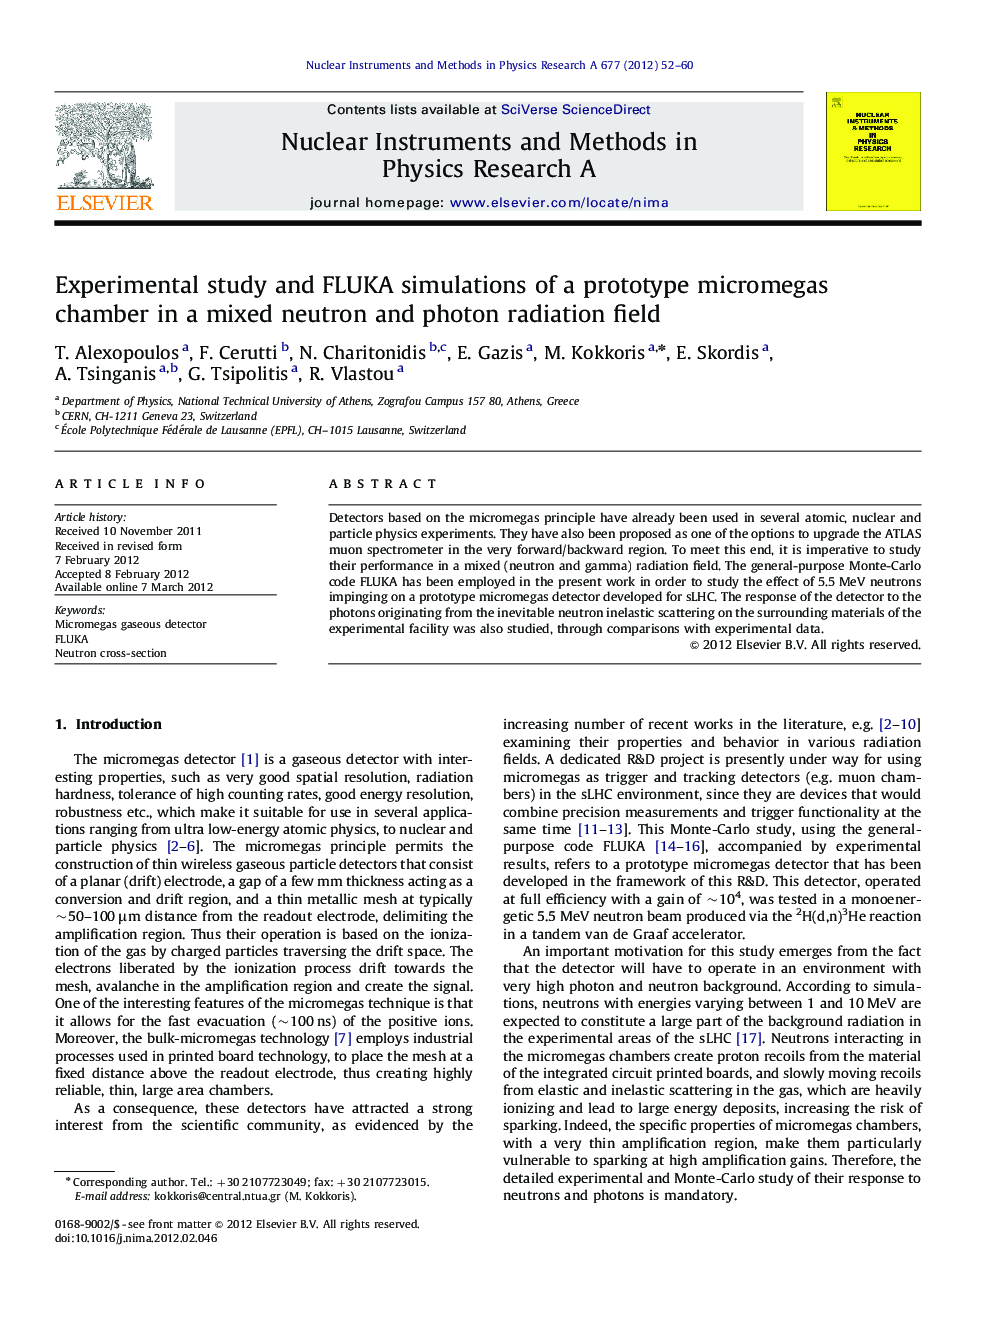 Experimental study and FLUKA simulations of a prototype micromegas chamber in a mixed neutron and photon radiation field